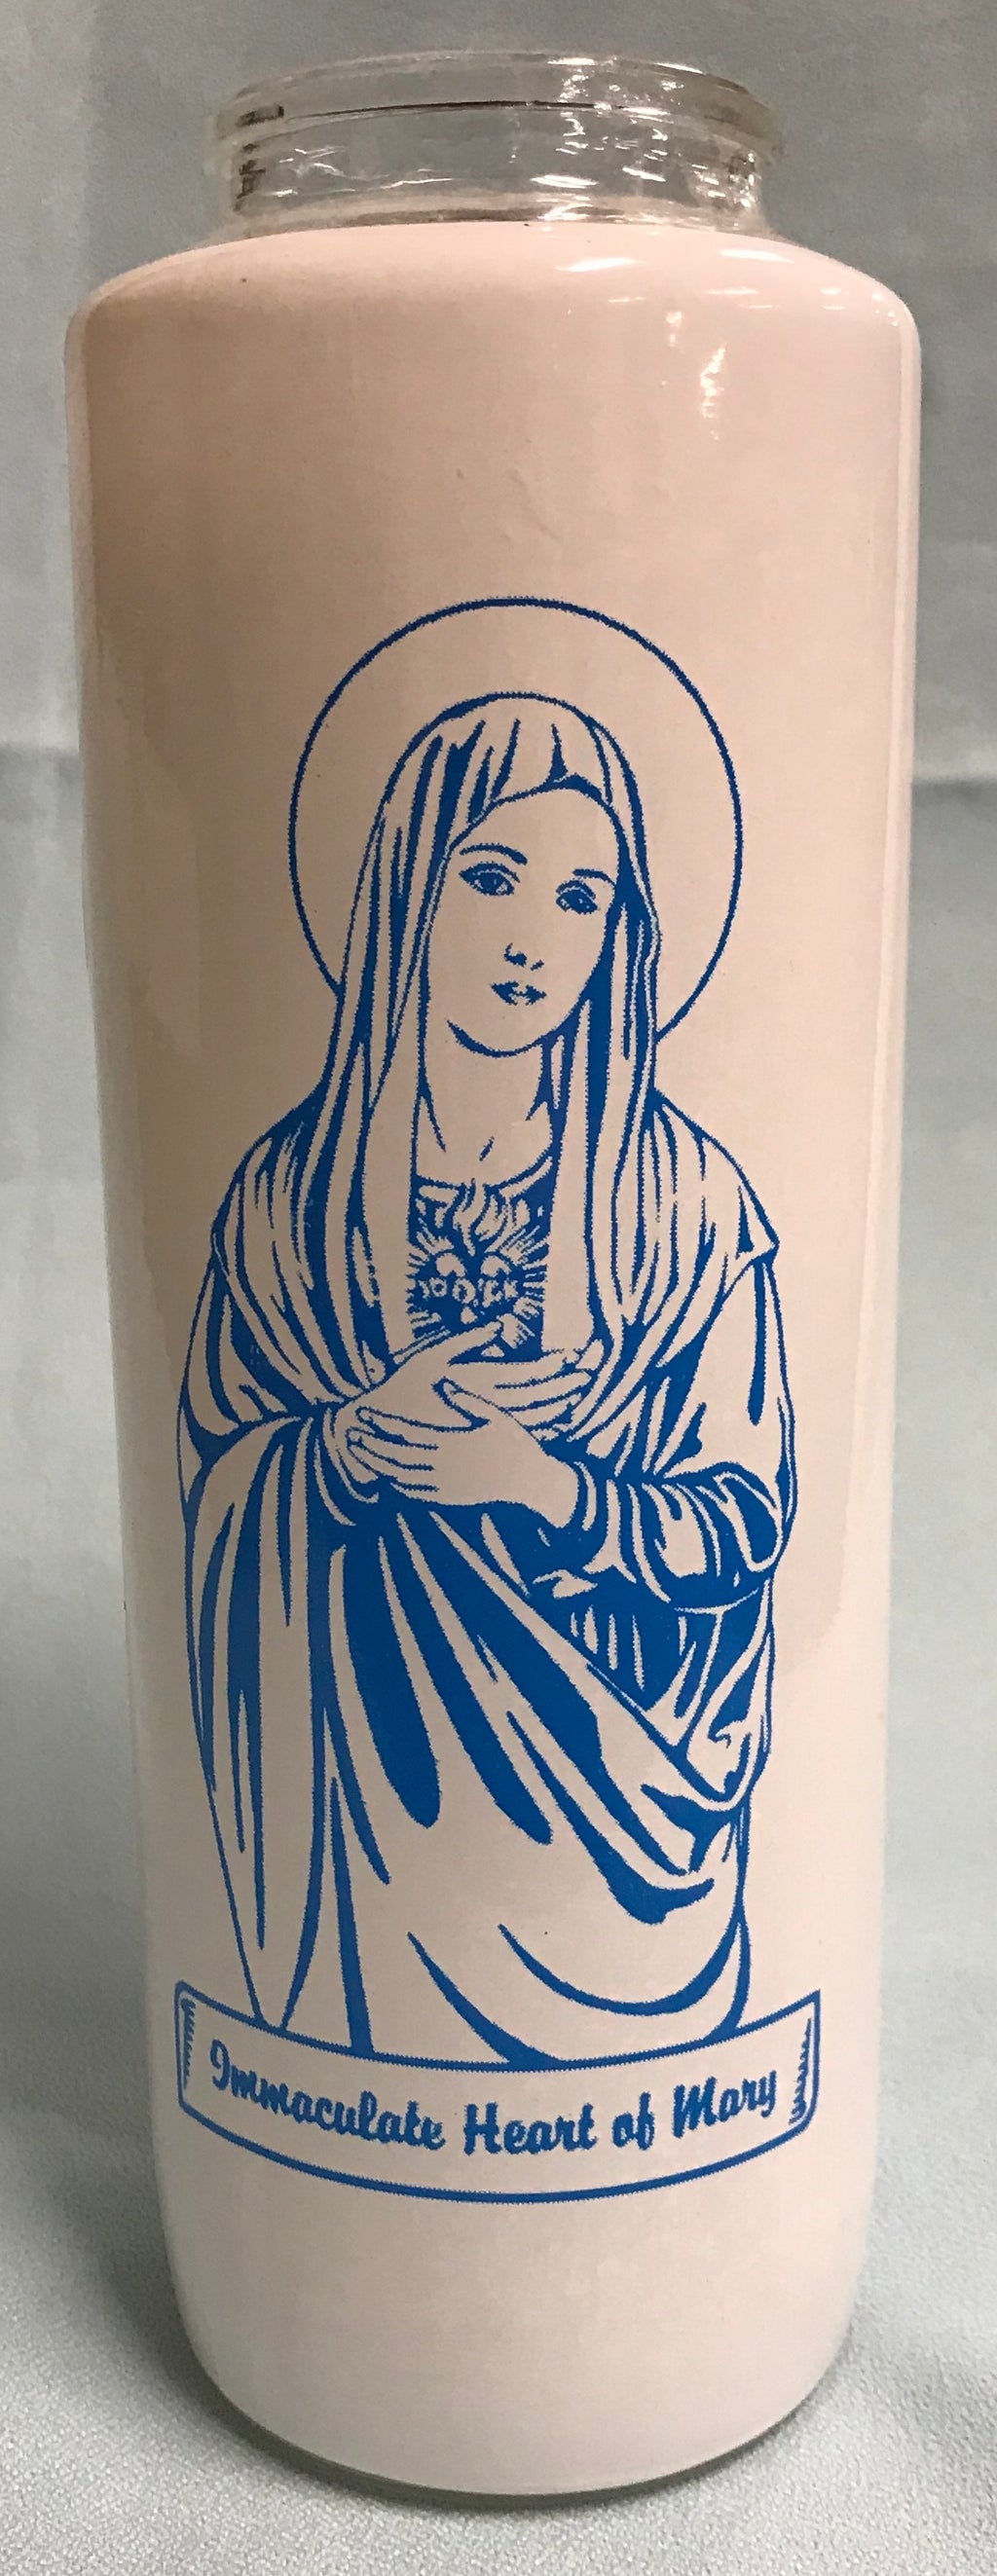 6-DAY IMMACULATE HEART CANDLE